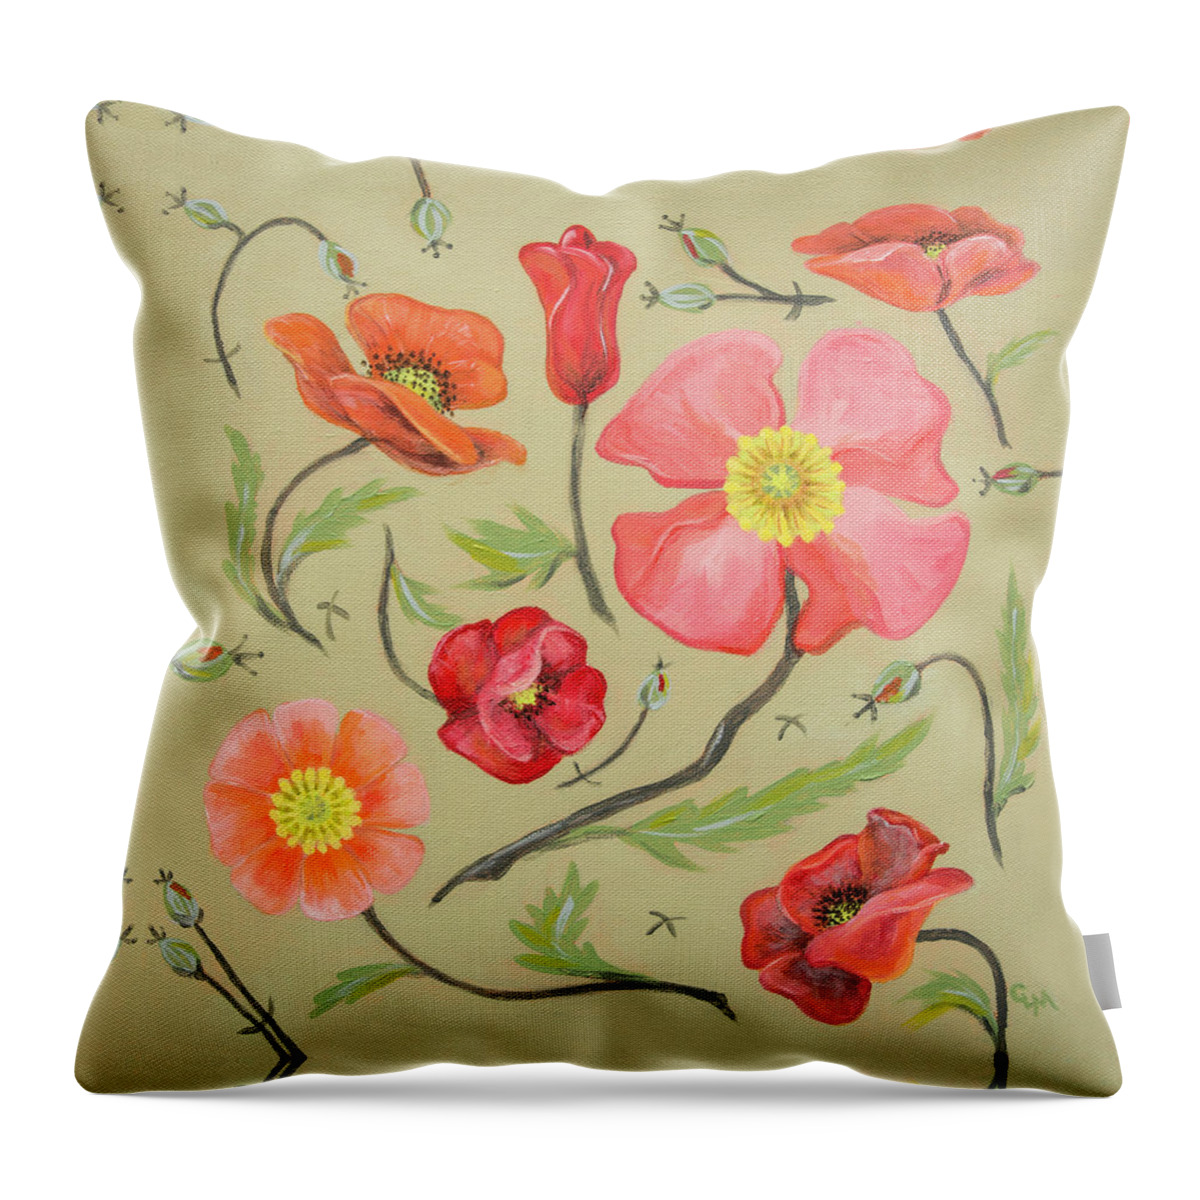 Poppy Throw Pillow featuring the painting Fairytale Poppies by Cheryl McClure